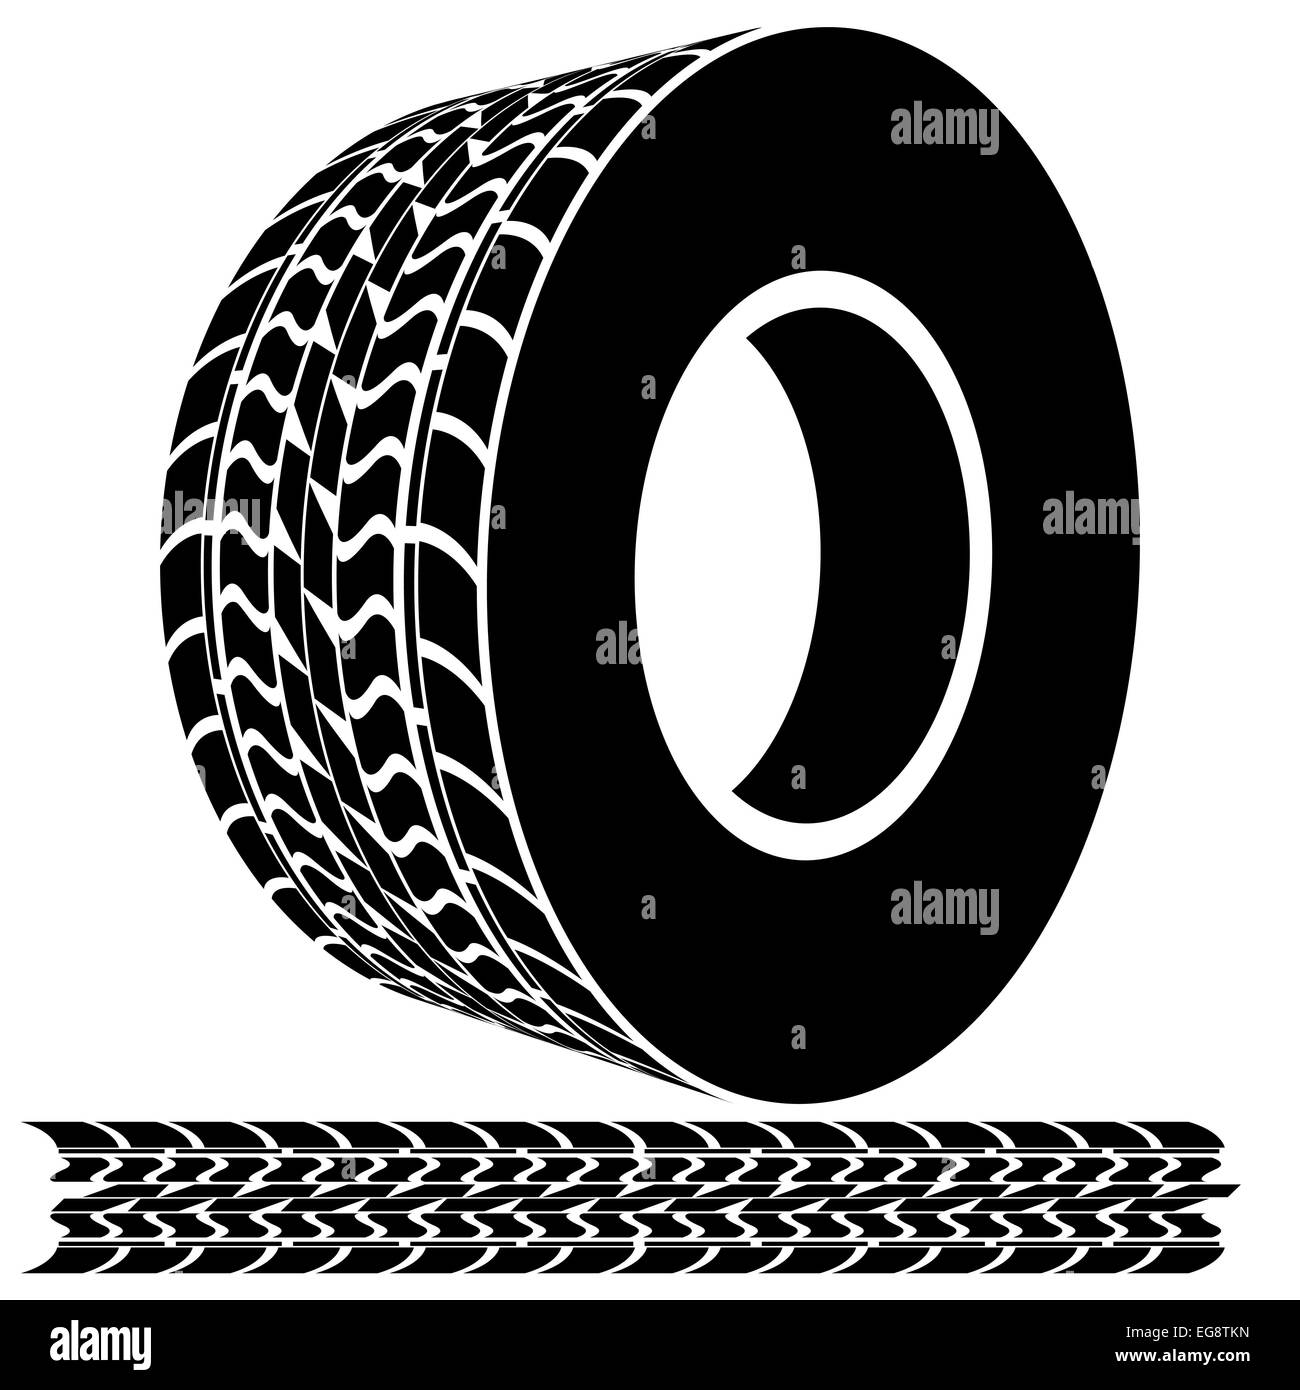 An image of a tire tread icon. Stock Photo